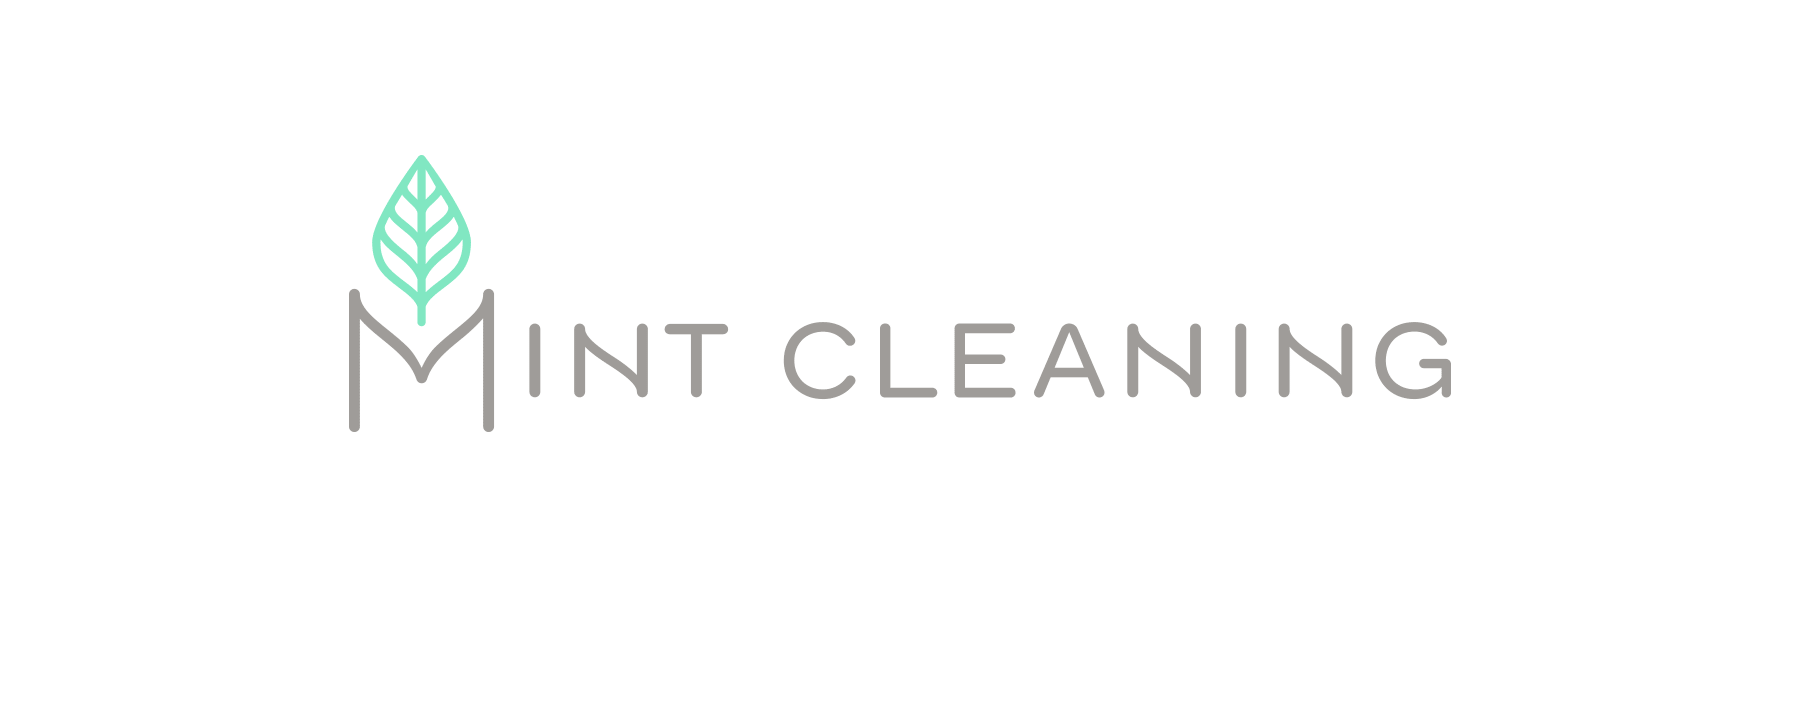 Mint Cleaning Logo